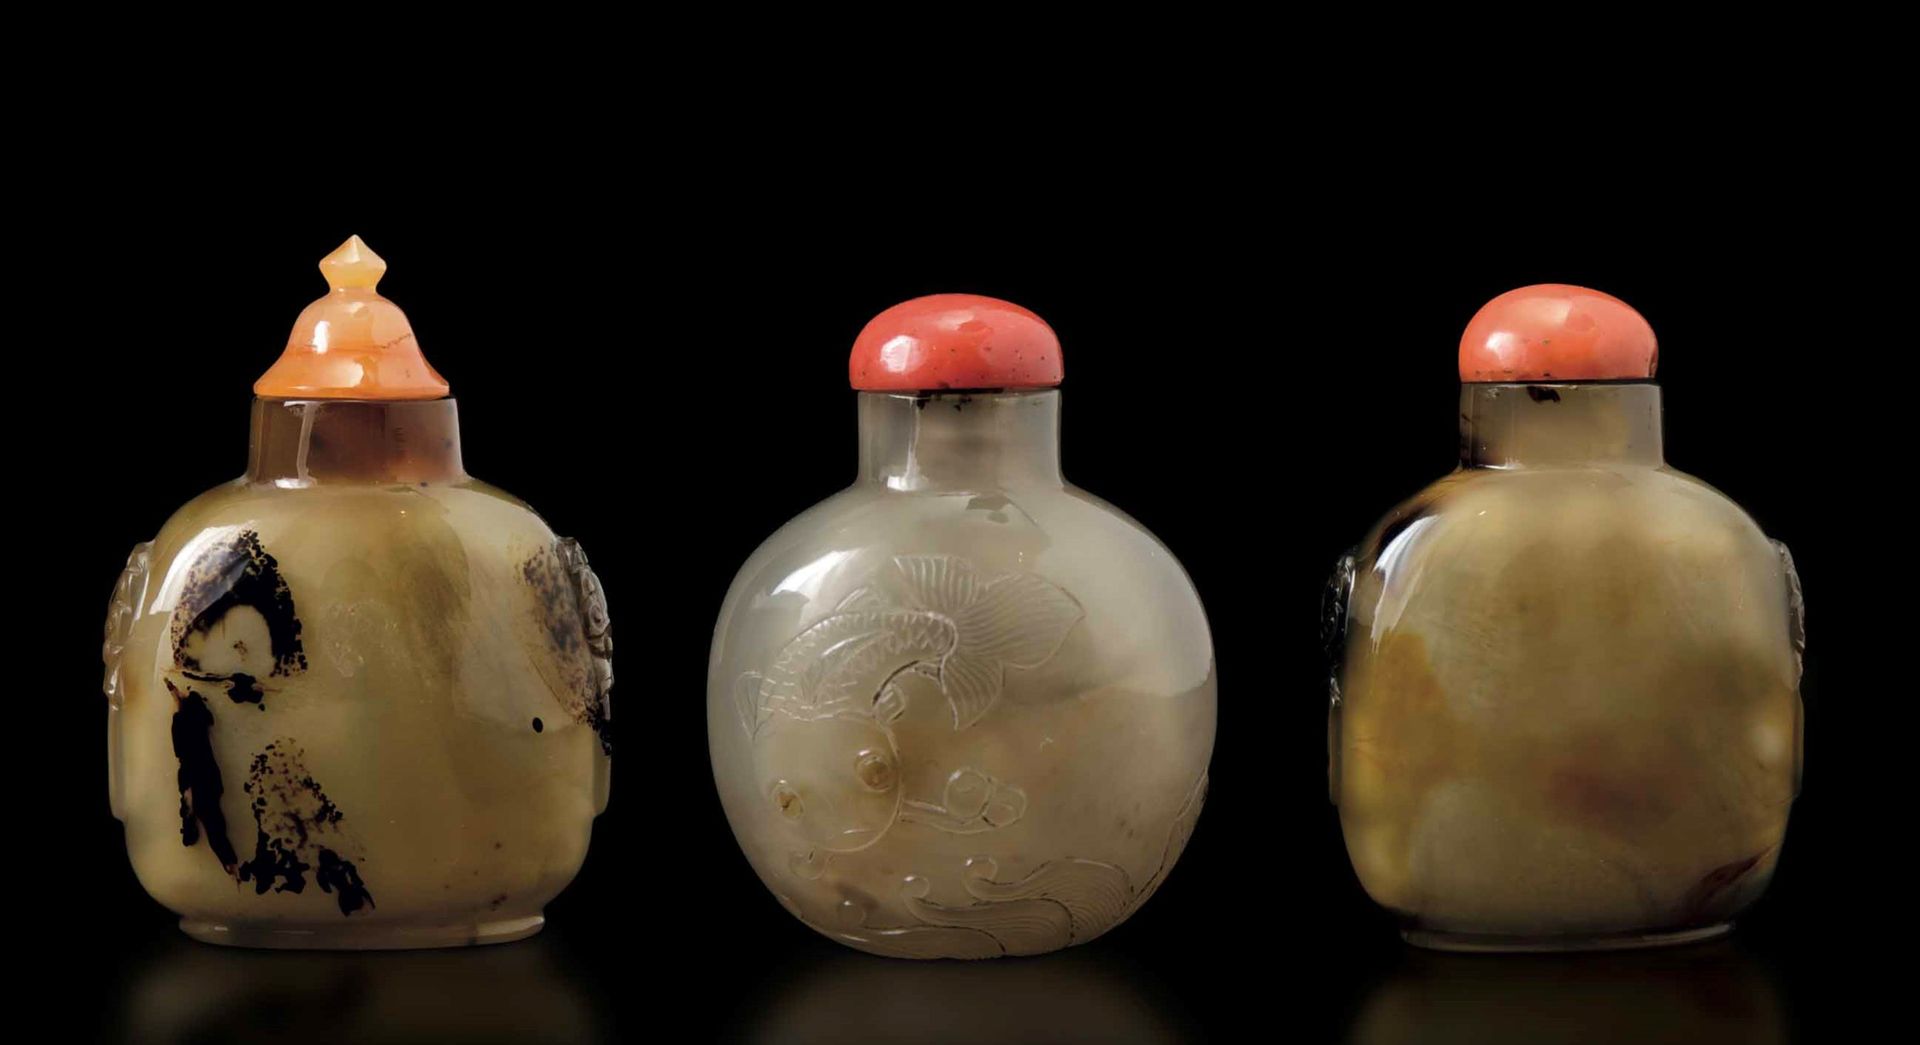 Three agate snuff bottles, China, 1800s Qing Dynasty. H from 6cm to 7cm